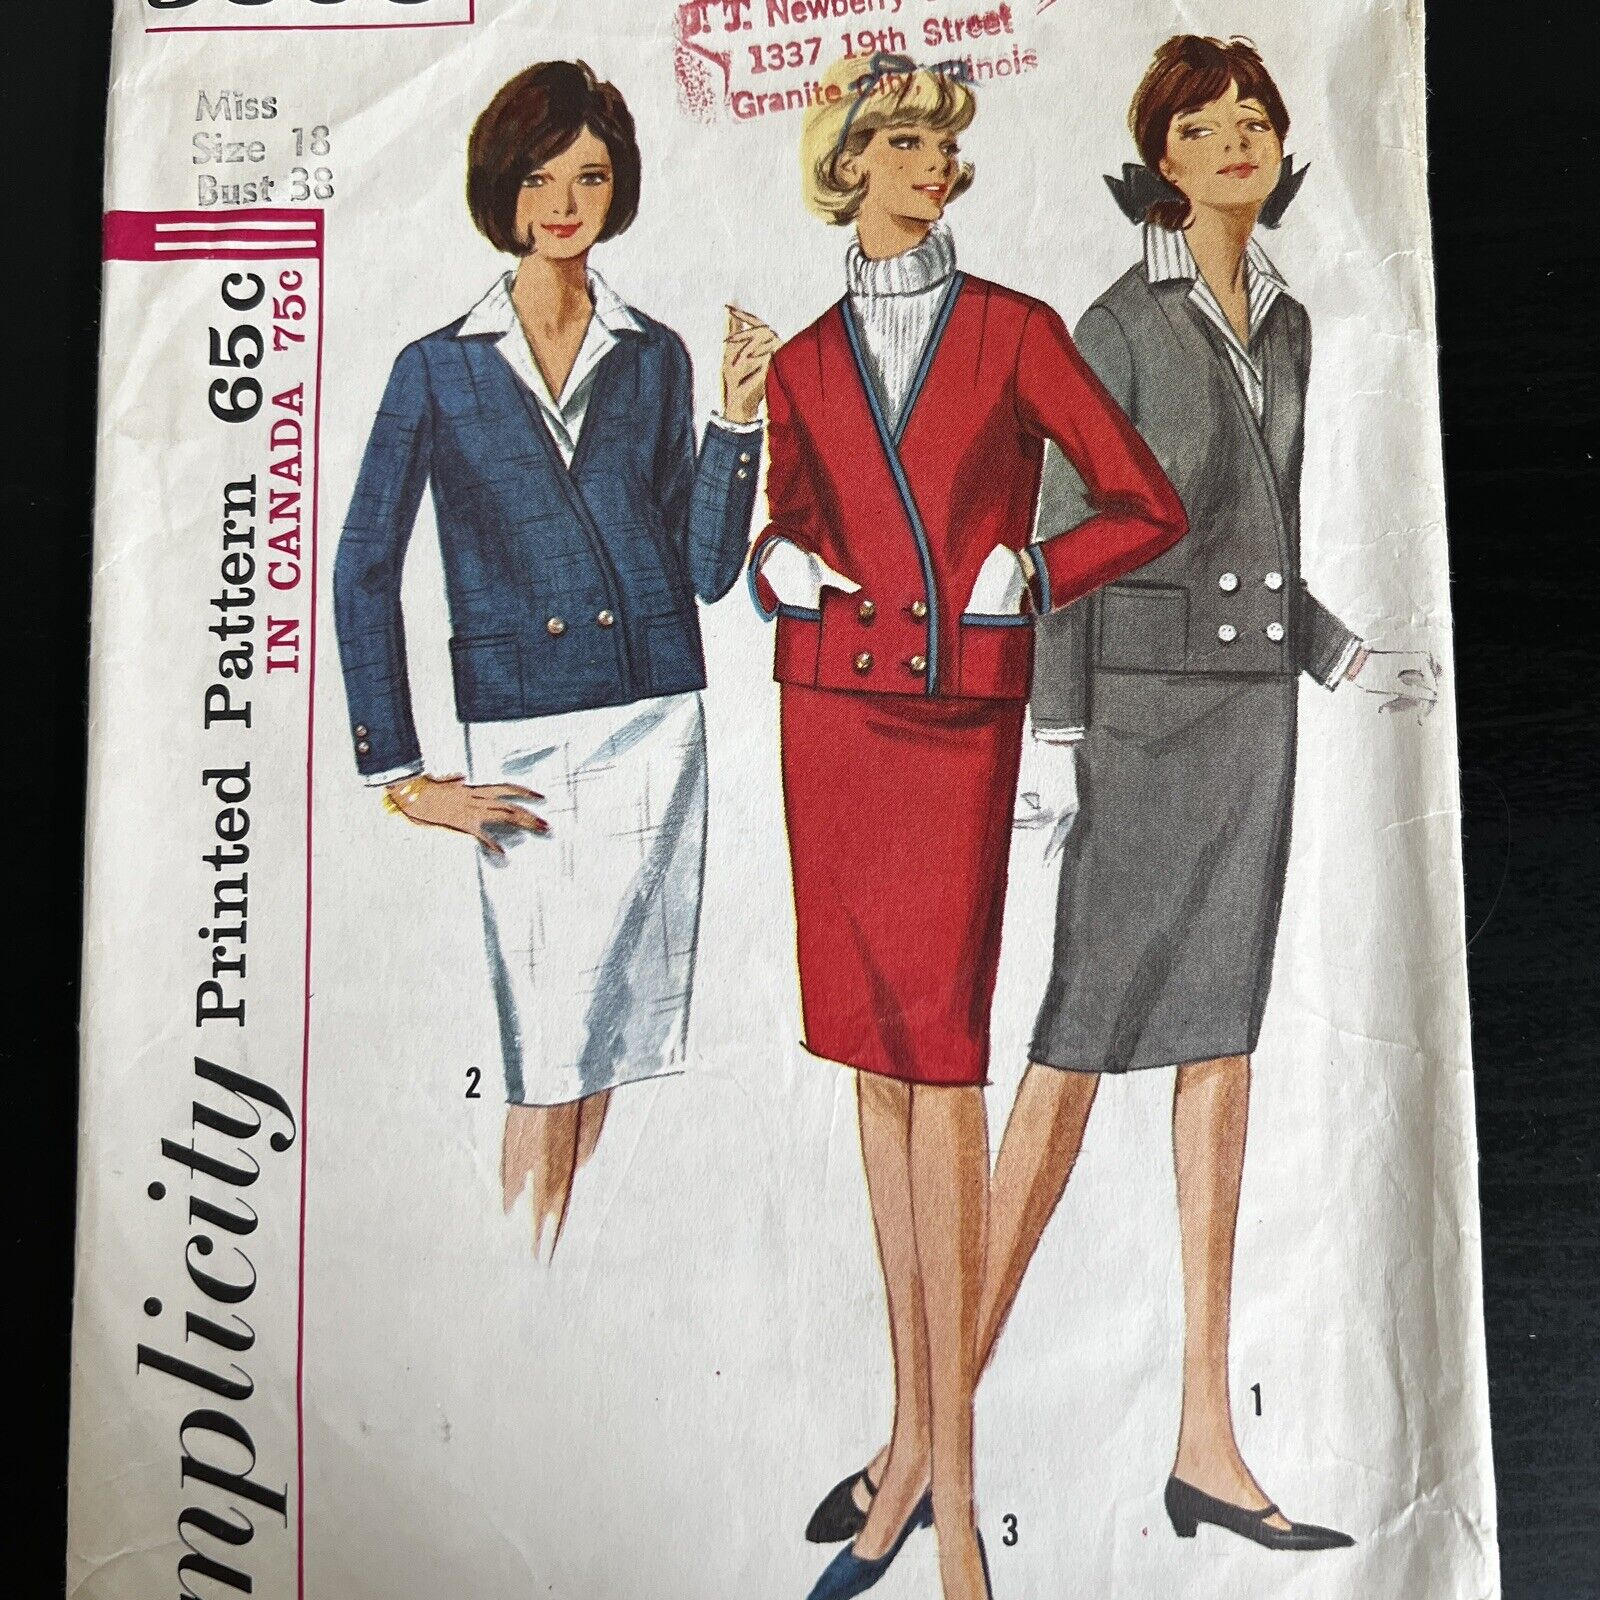 Vintage 1960s Simplicity 5595 Skirt Suit with Dickey Cuffs Sewing Pattern 18 CUT